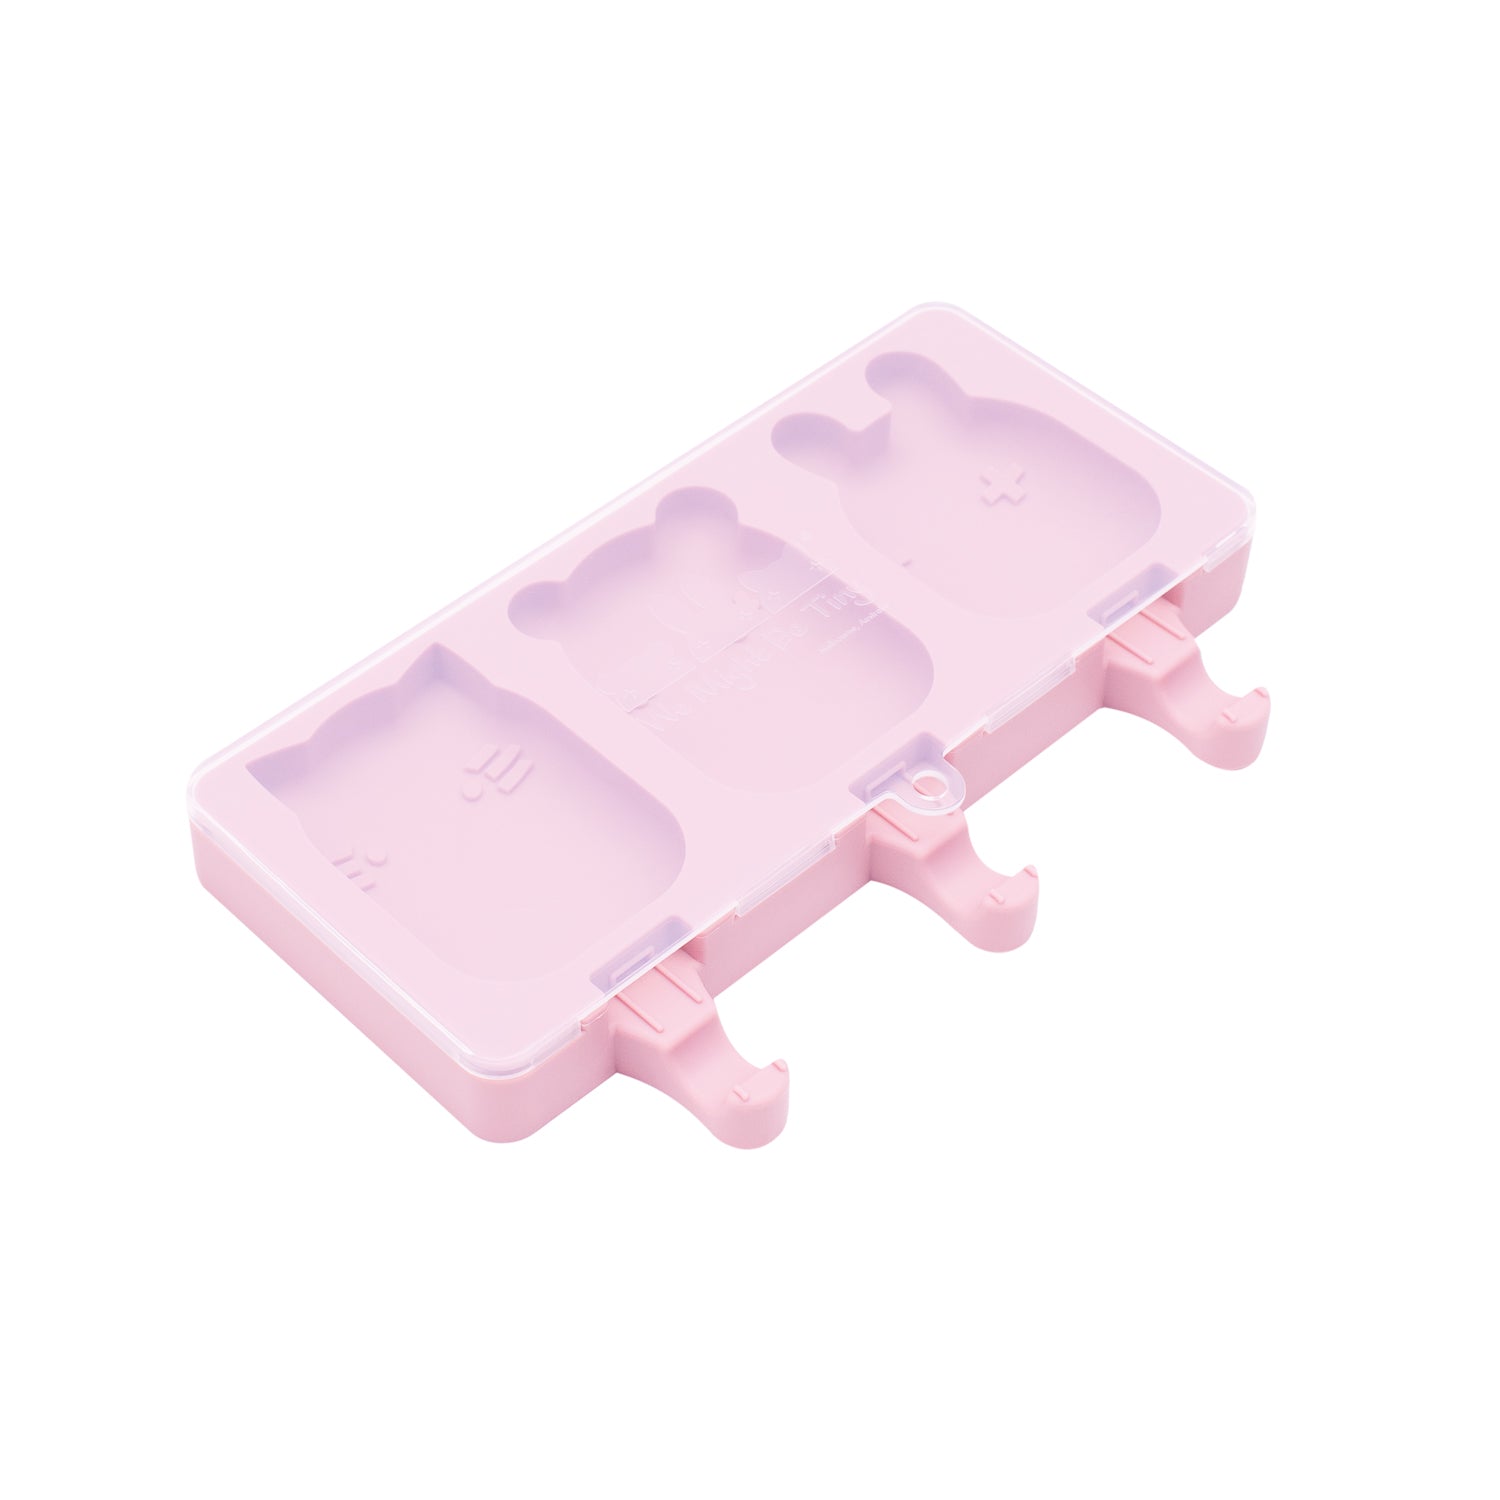 Frosties Icy pole Mould - Powder Pink